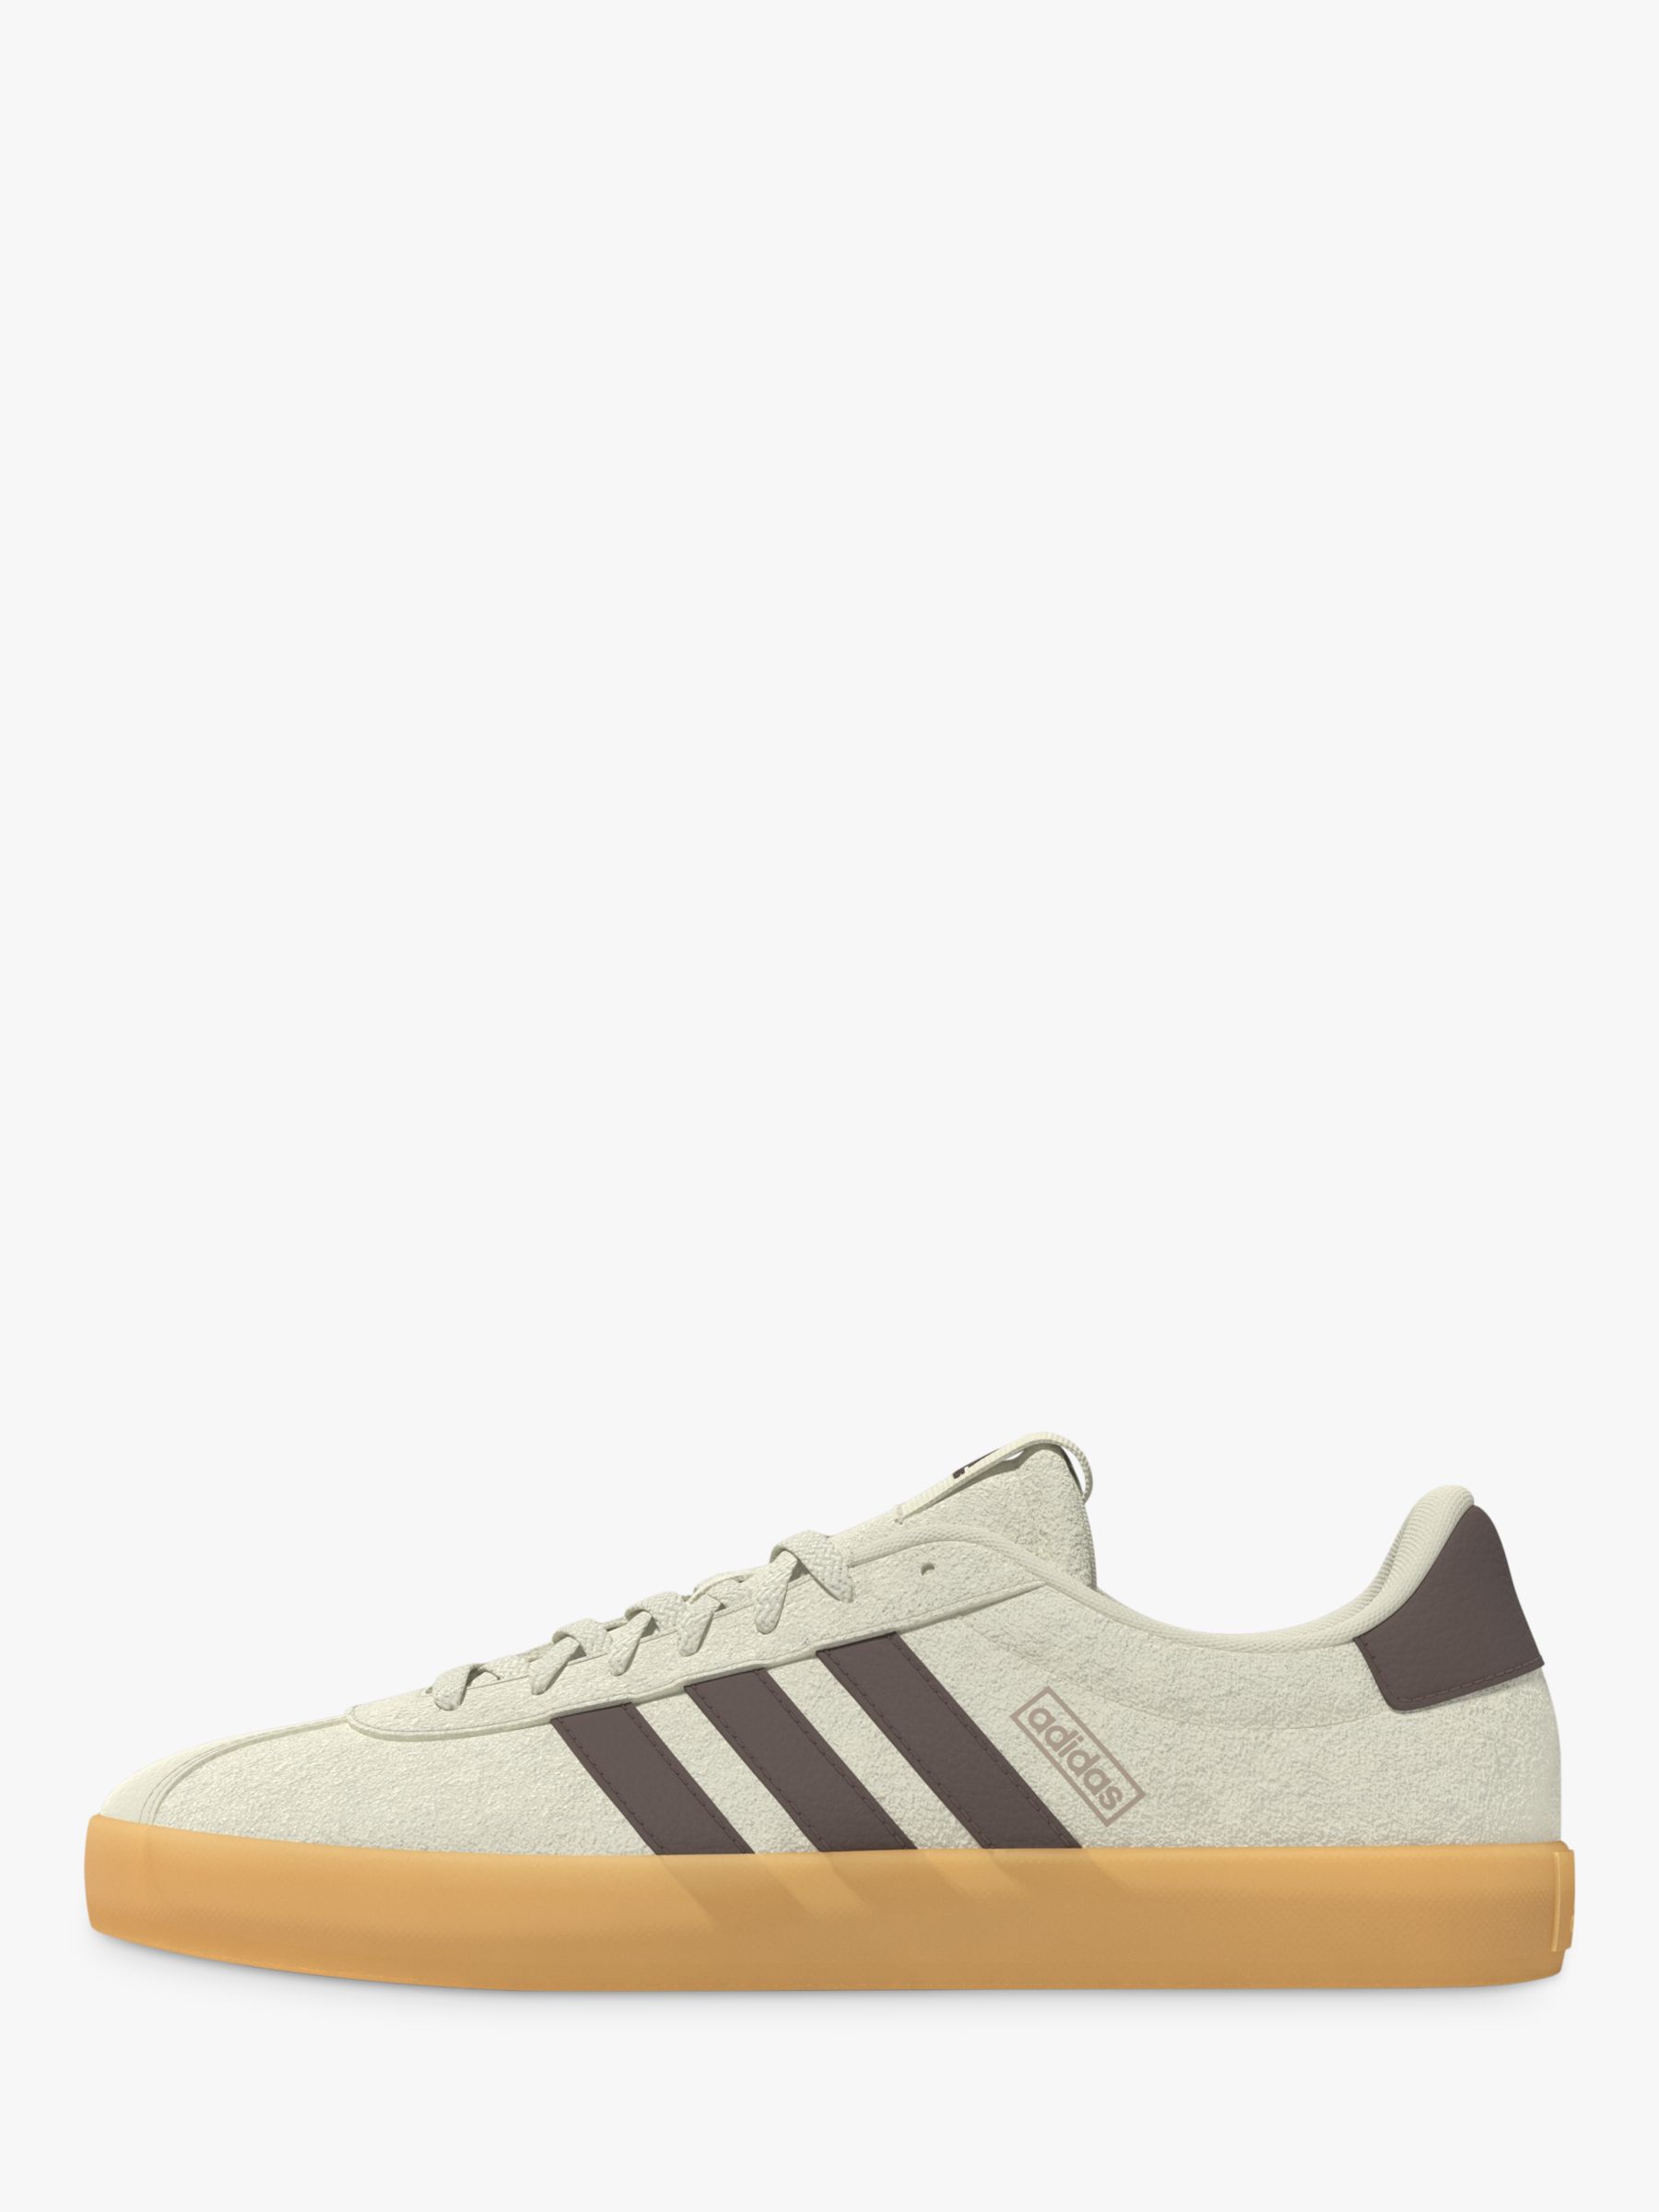 adidas VL Court Trainers, White/Earth at John Lewis & Partners